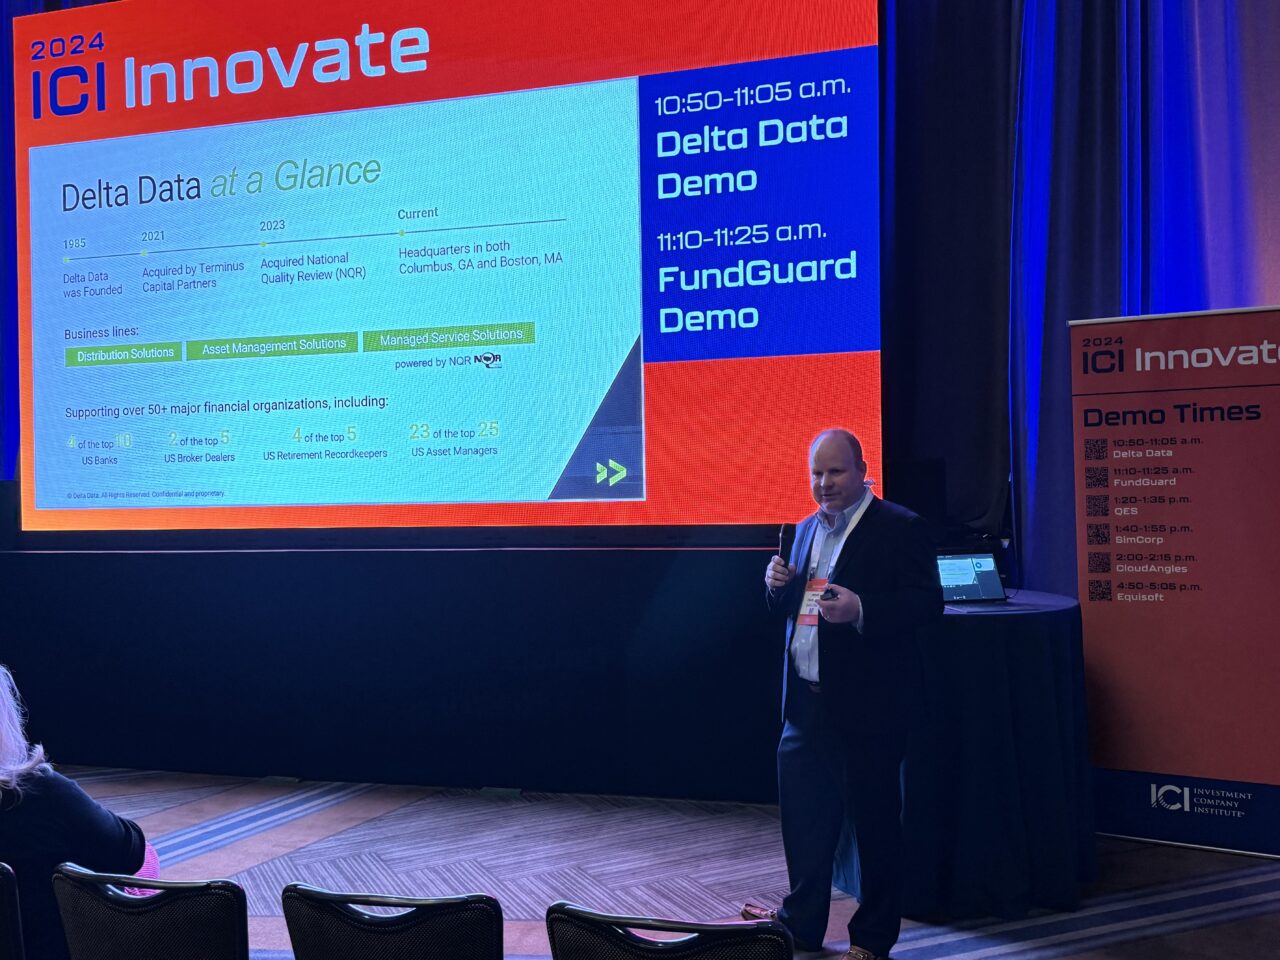 Top Takeaways from ICI Innovate 2024